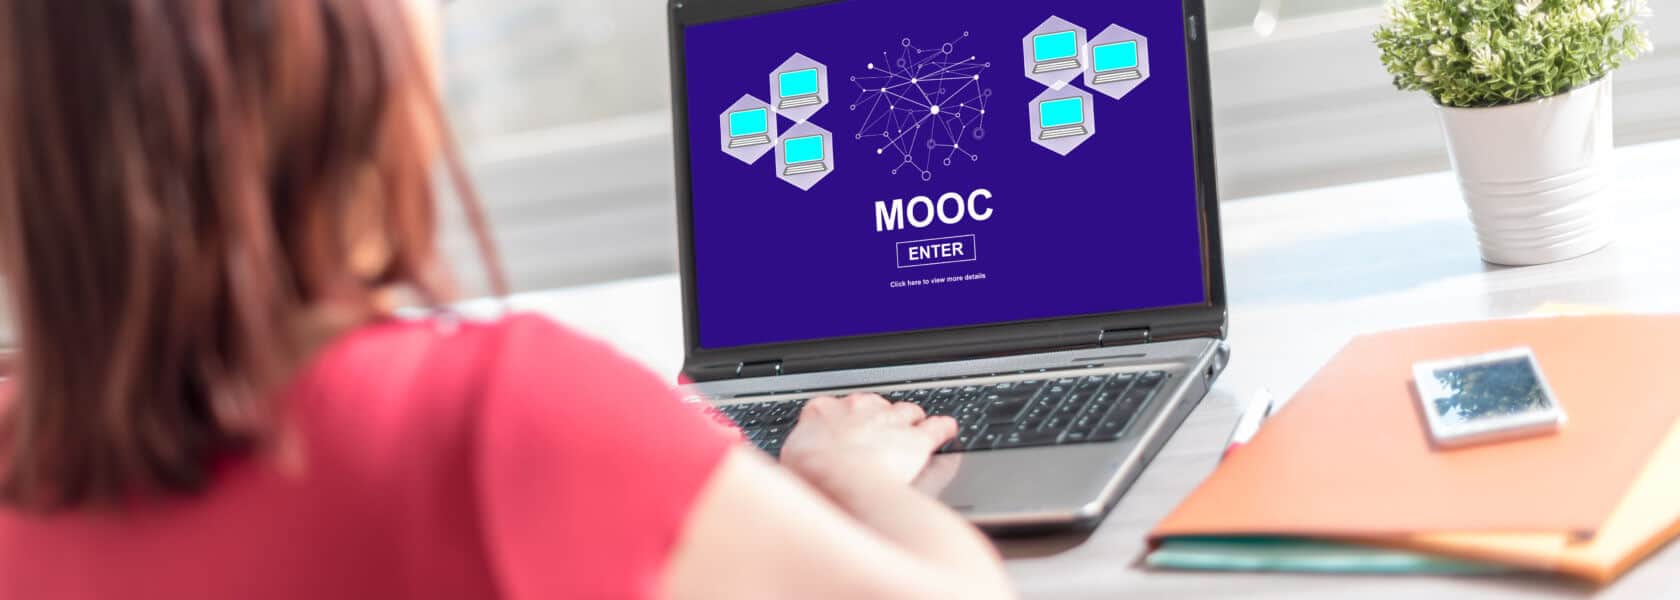 MOOCs: The New Way of Learning and Upskilling